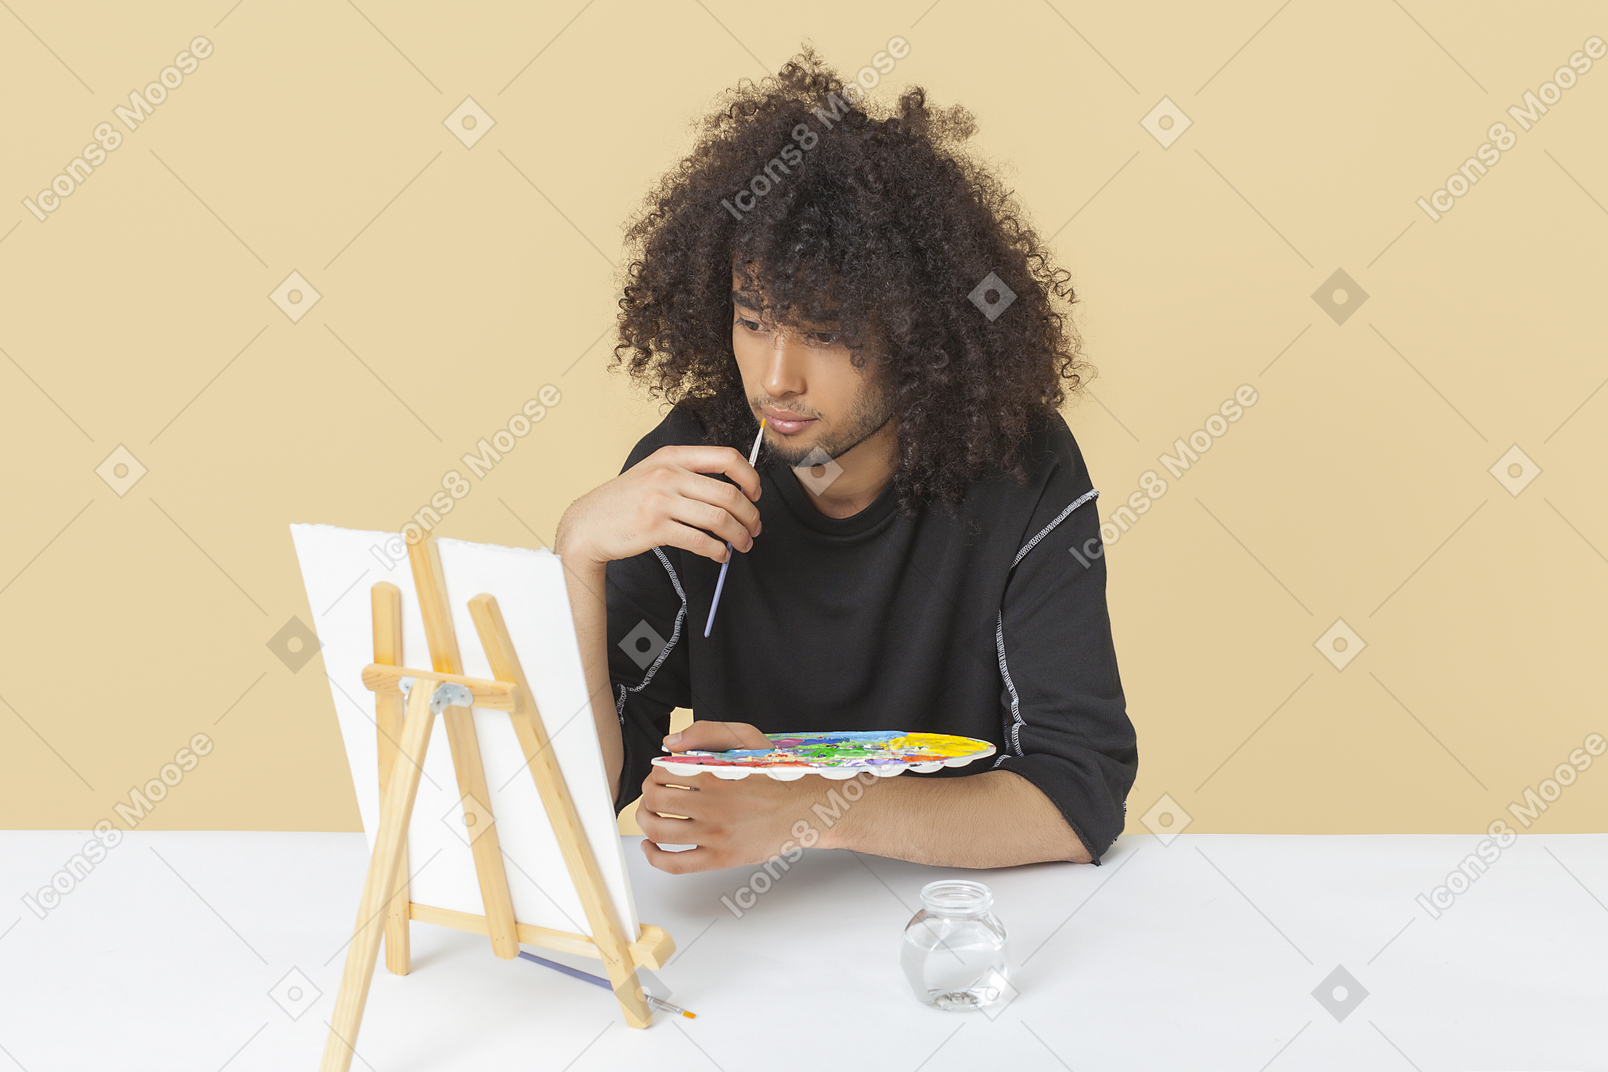 Creating a masterpiece